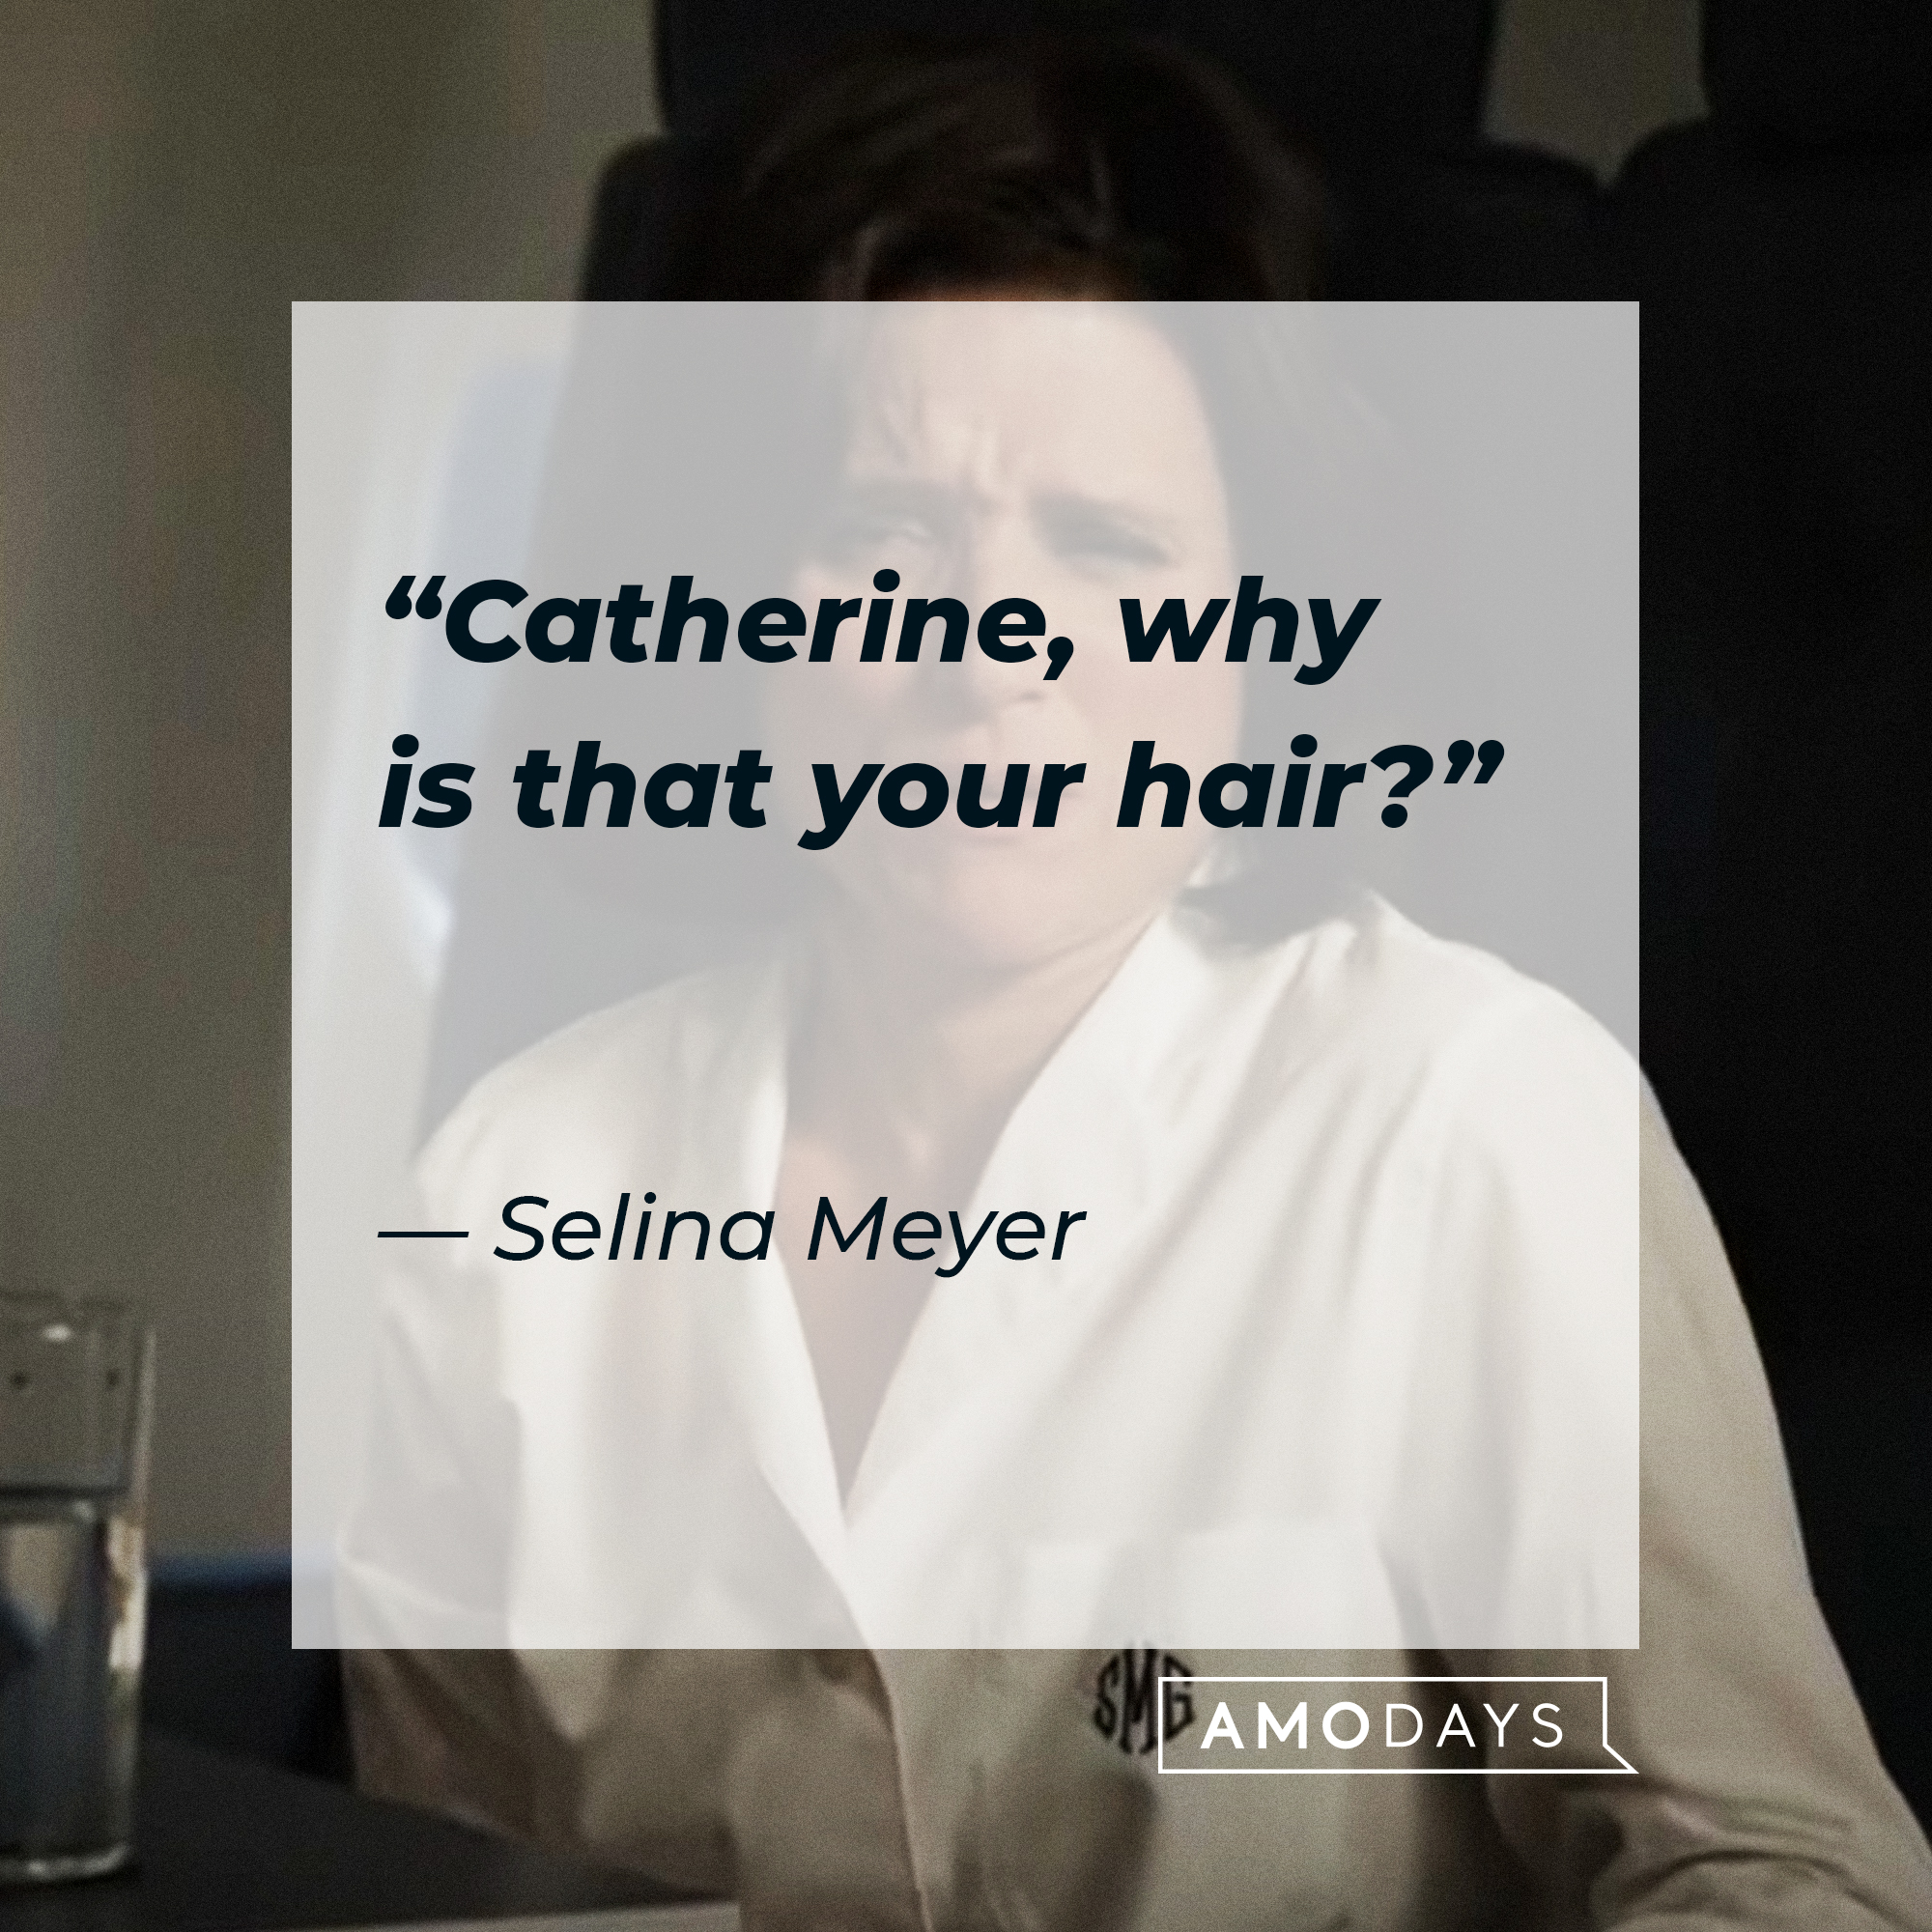 Selina Meyer, with her quote: “Catherine, why is that your hair?”│Source: youtube.com / Max